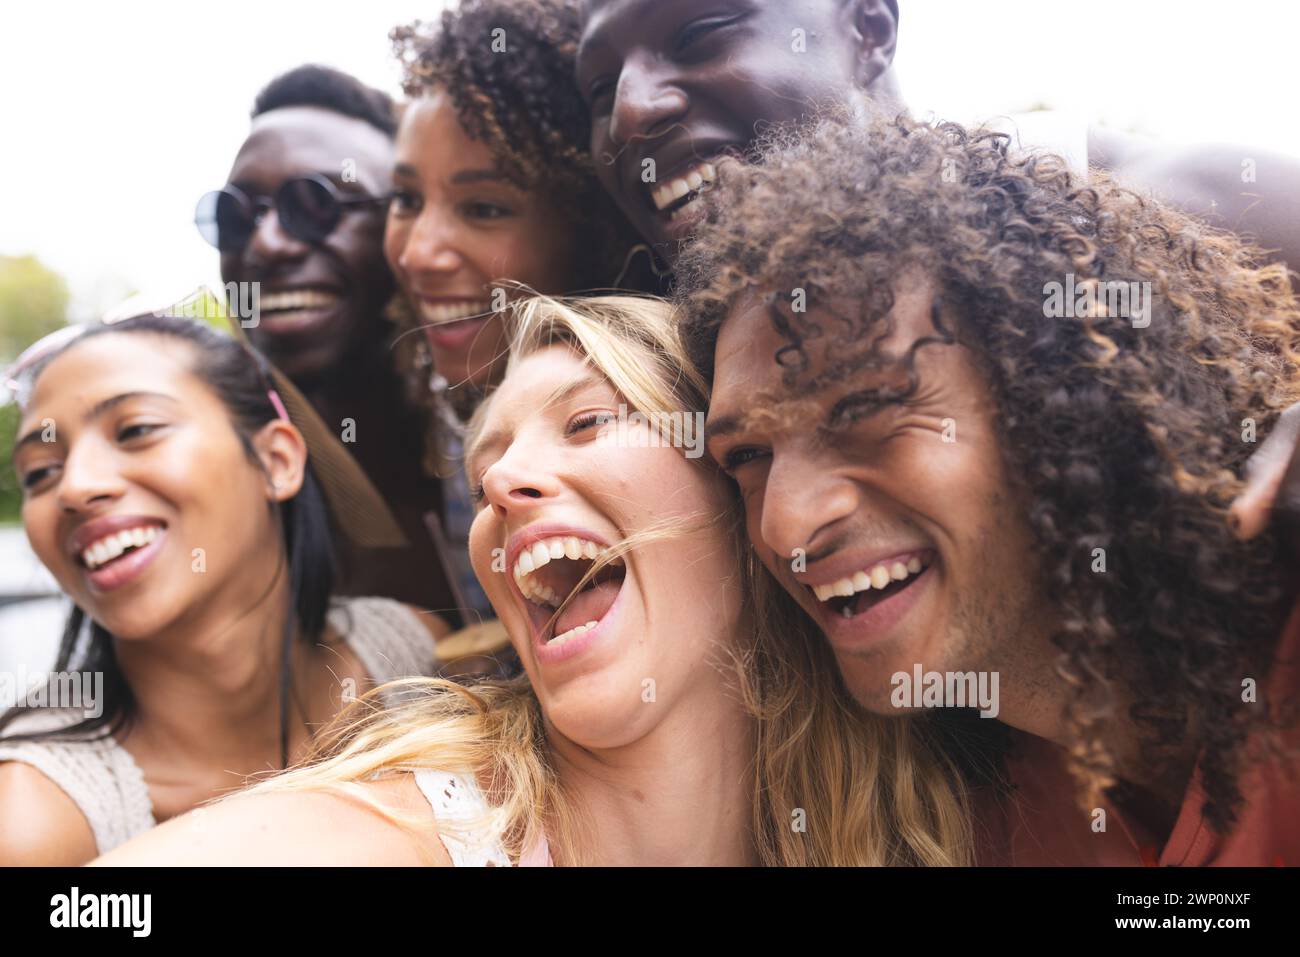 Diverse group of friends share a joyful moment, laughing together outdoors Stock Photo